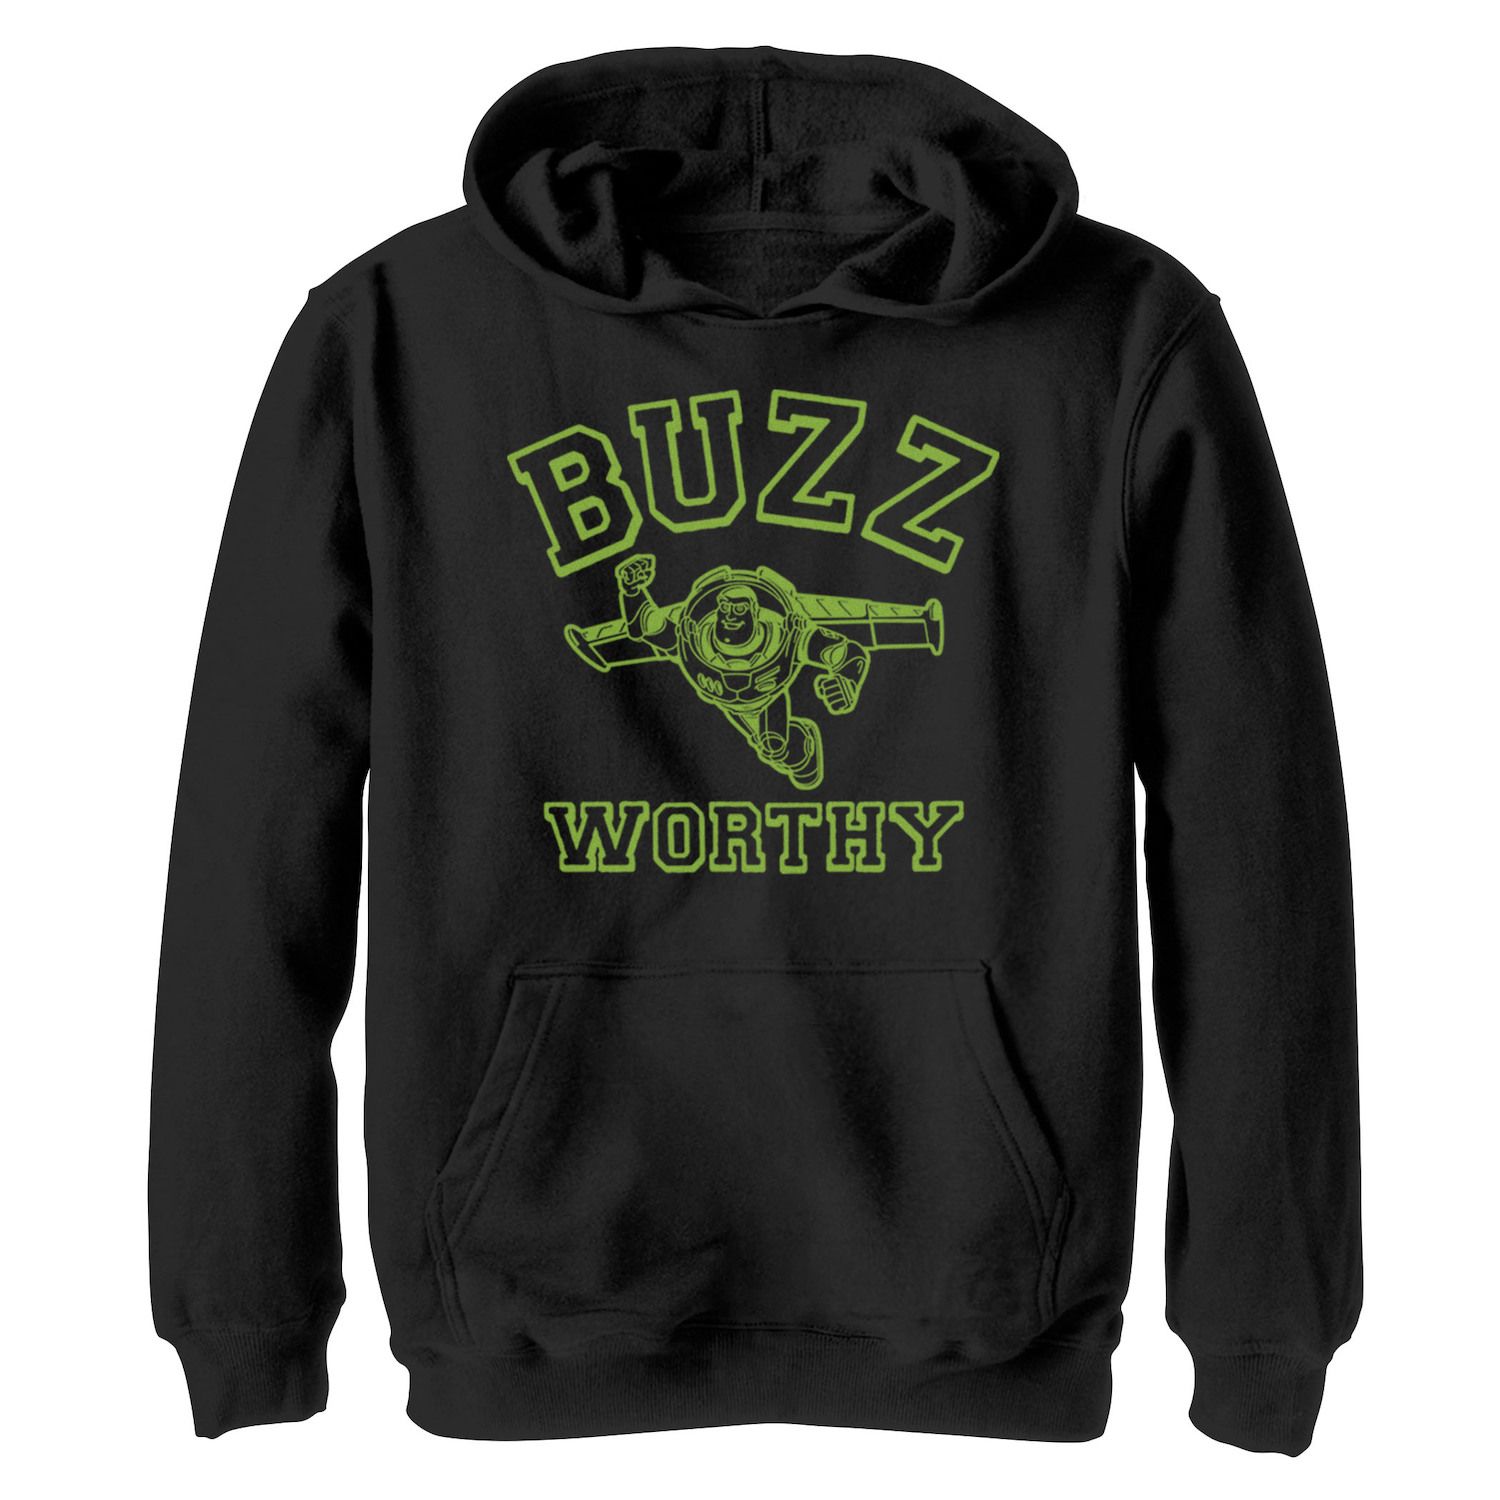 Image for Disney / Pixar Toy Story Boys 8-20 Buzz Lightyear Buzz Worthy Pullover Graphic Hoodie at Kohl's.